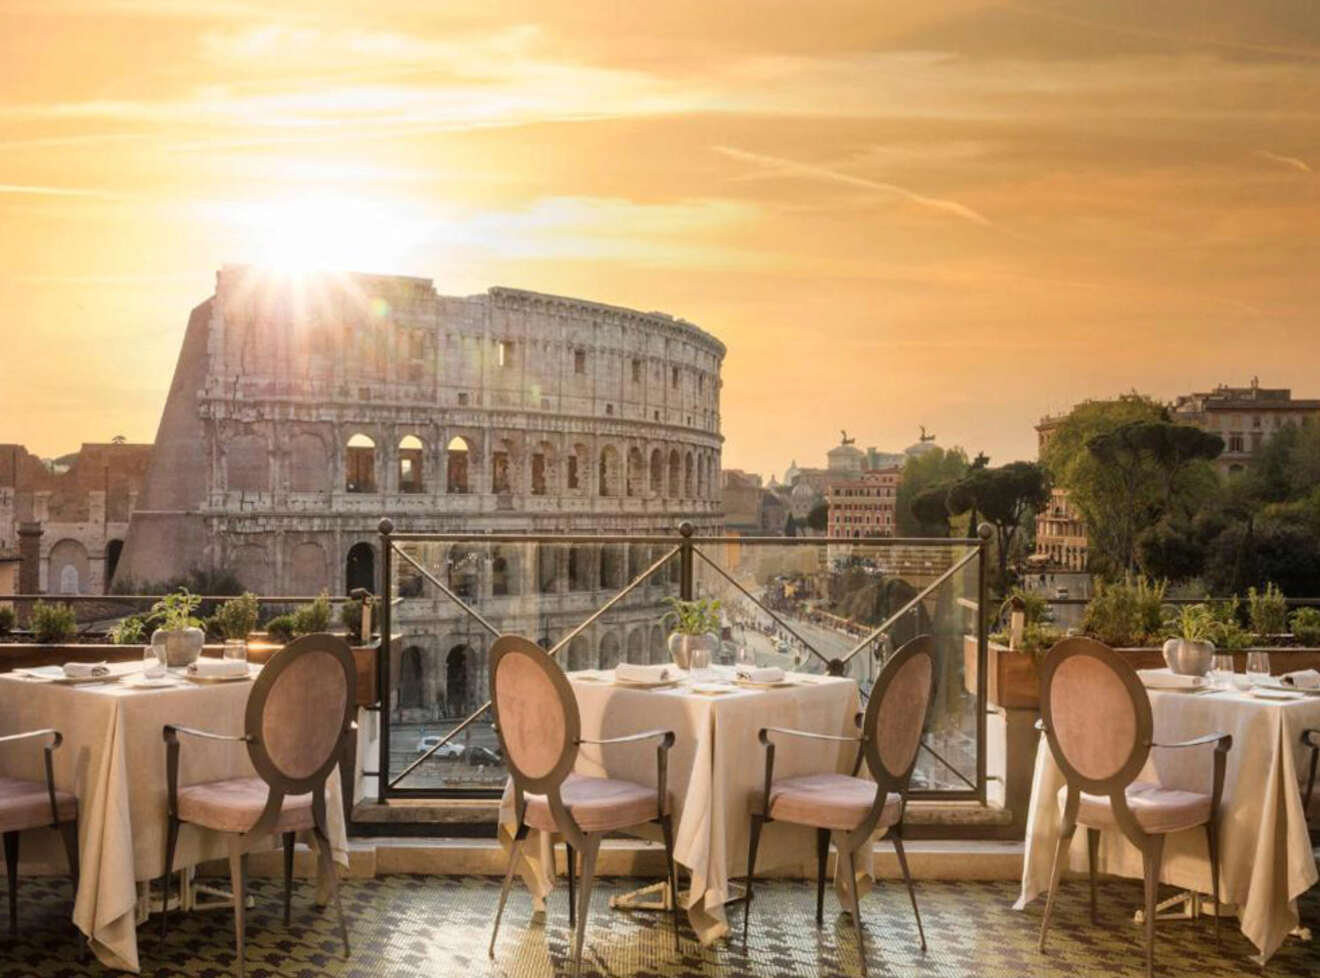 View of the Colosseum from a hotel restaurant at sunset